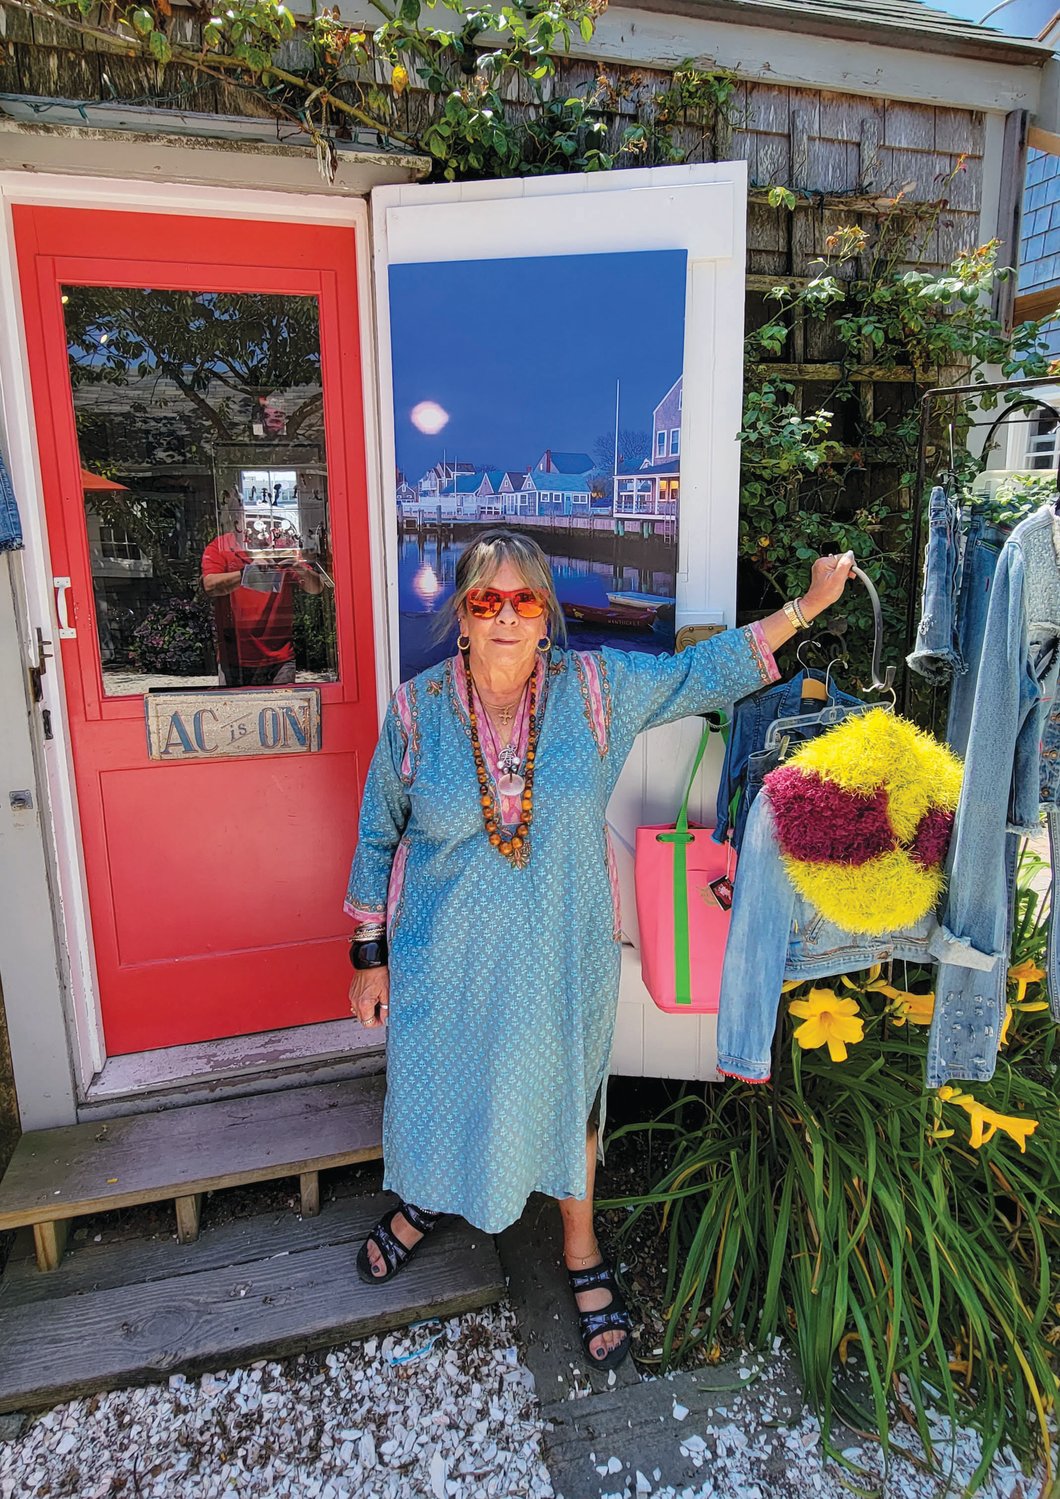 Kathleen Duncombe’s Made on Nantucket has been on Old South Wharf for 13 years.